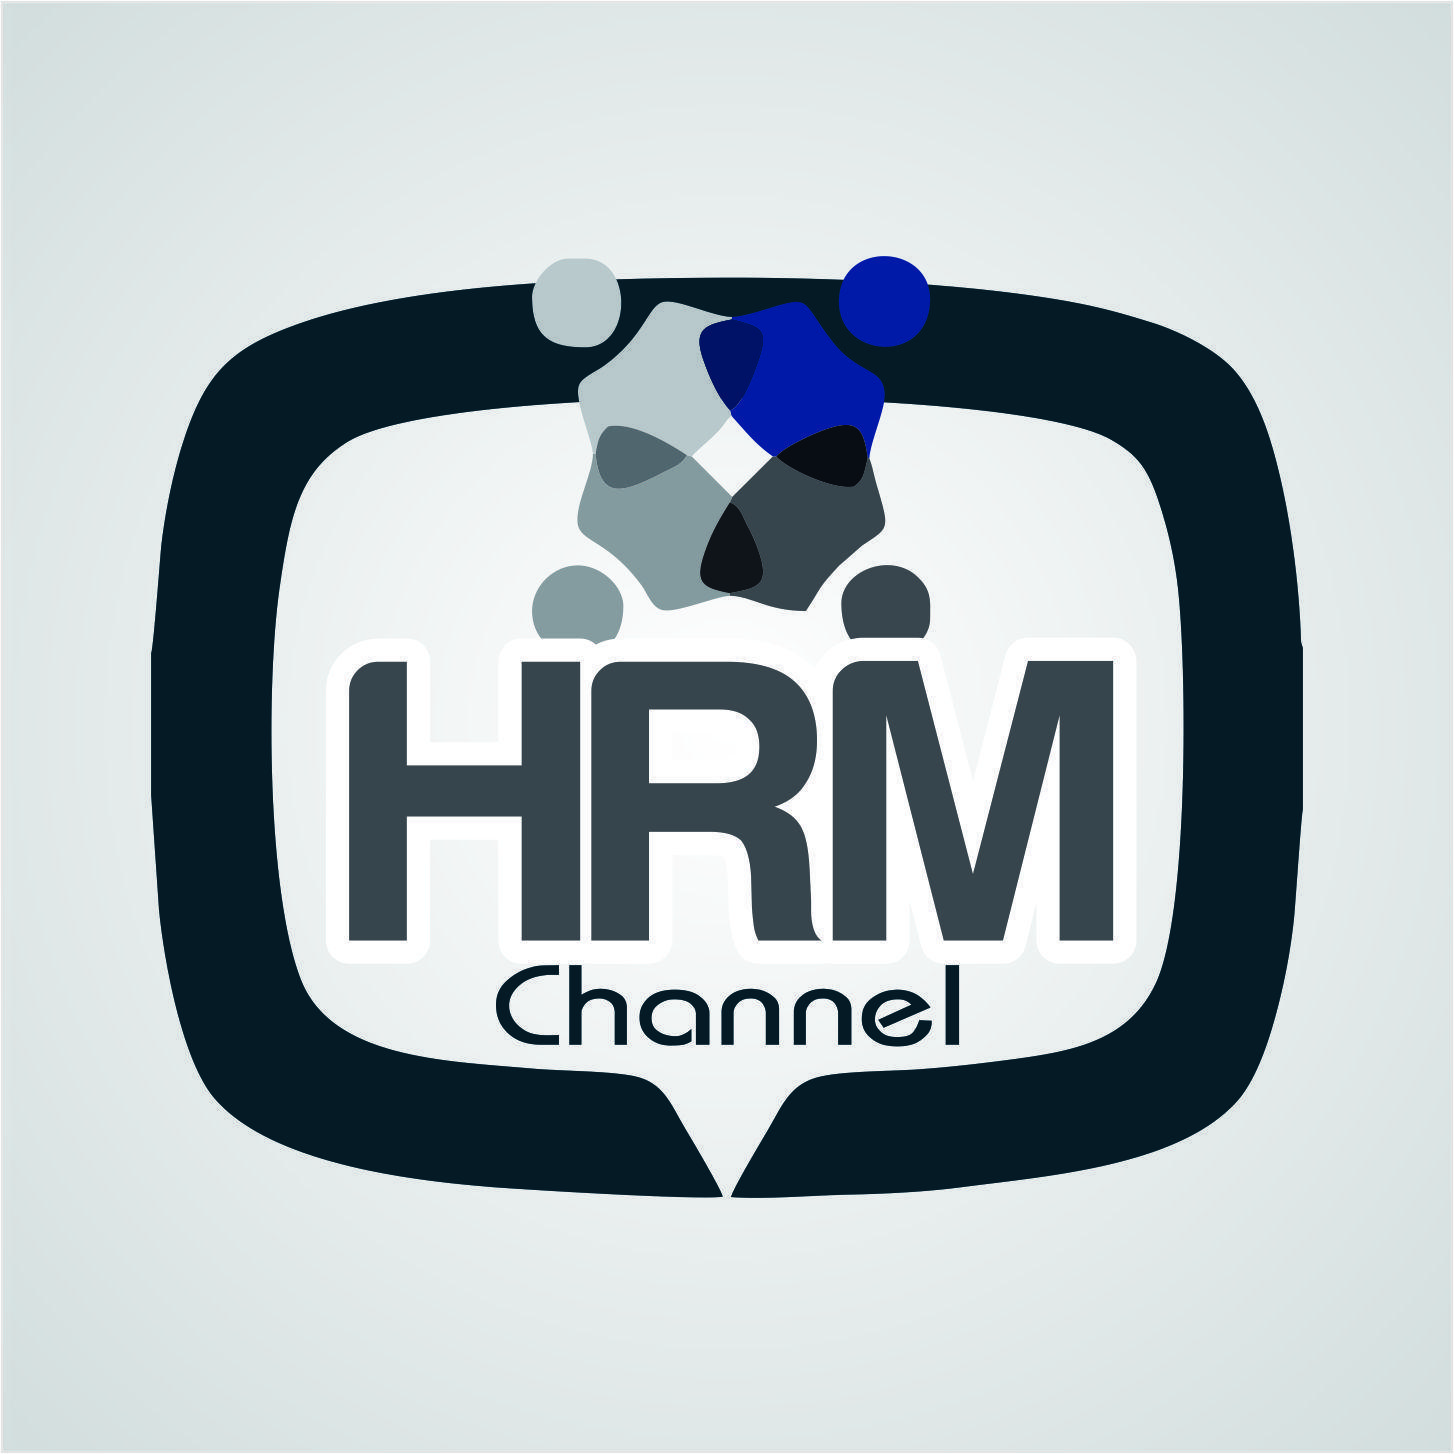 HRM Logo - Bold, Serious, Consulting Logo Design for HRM Channel